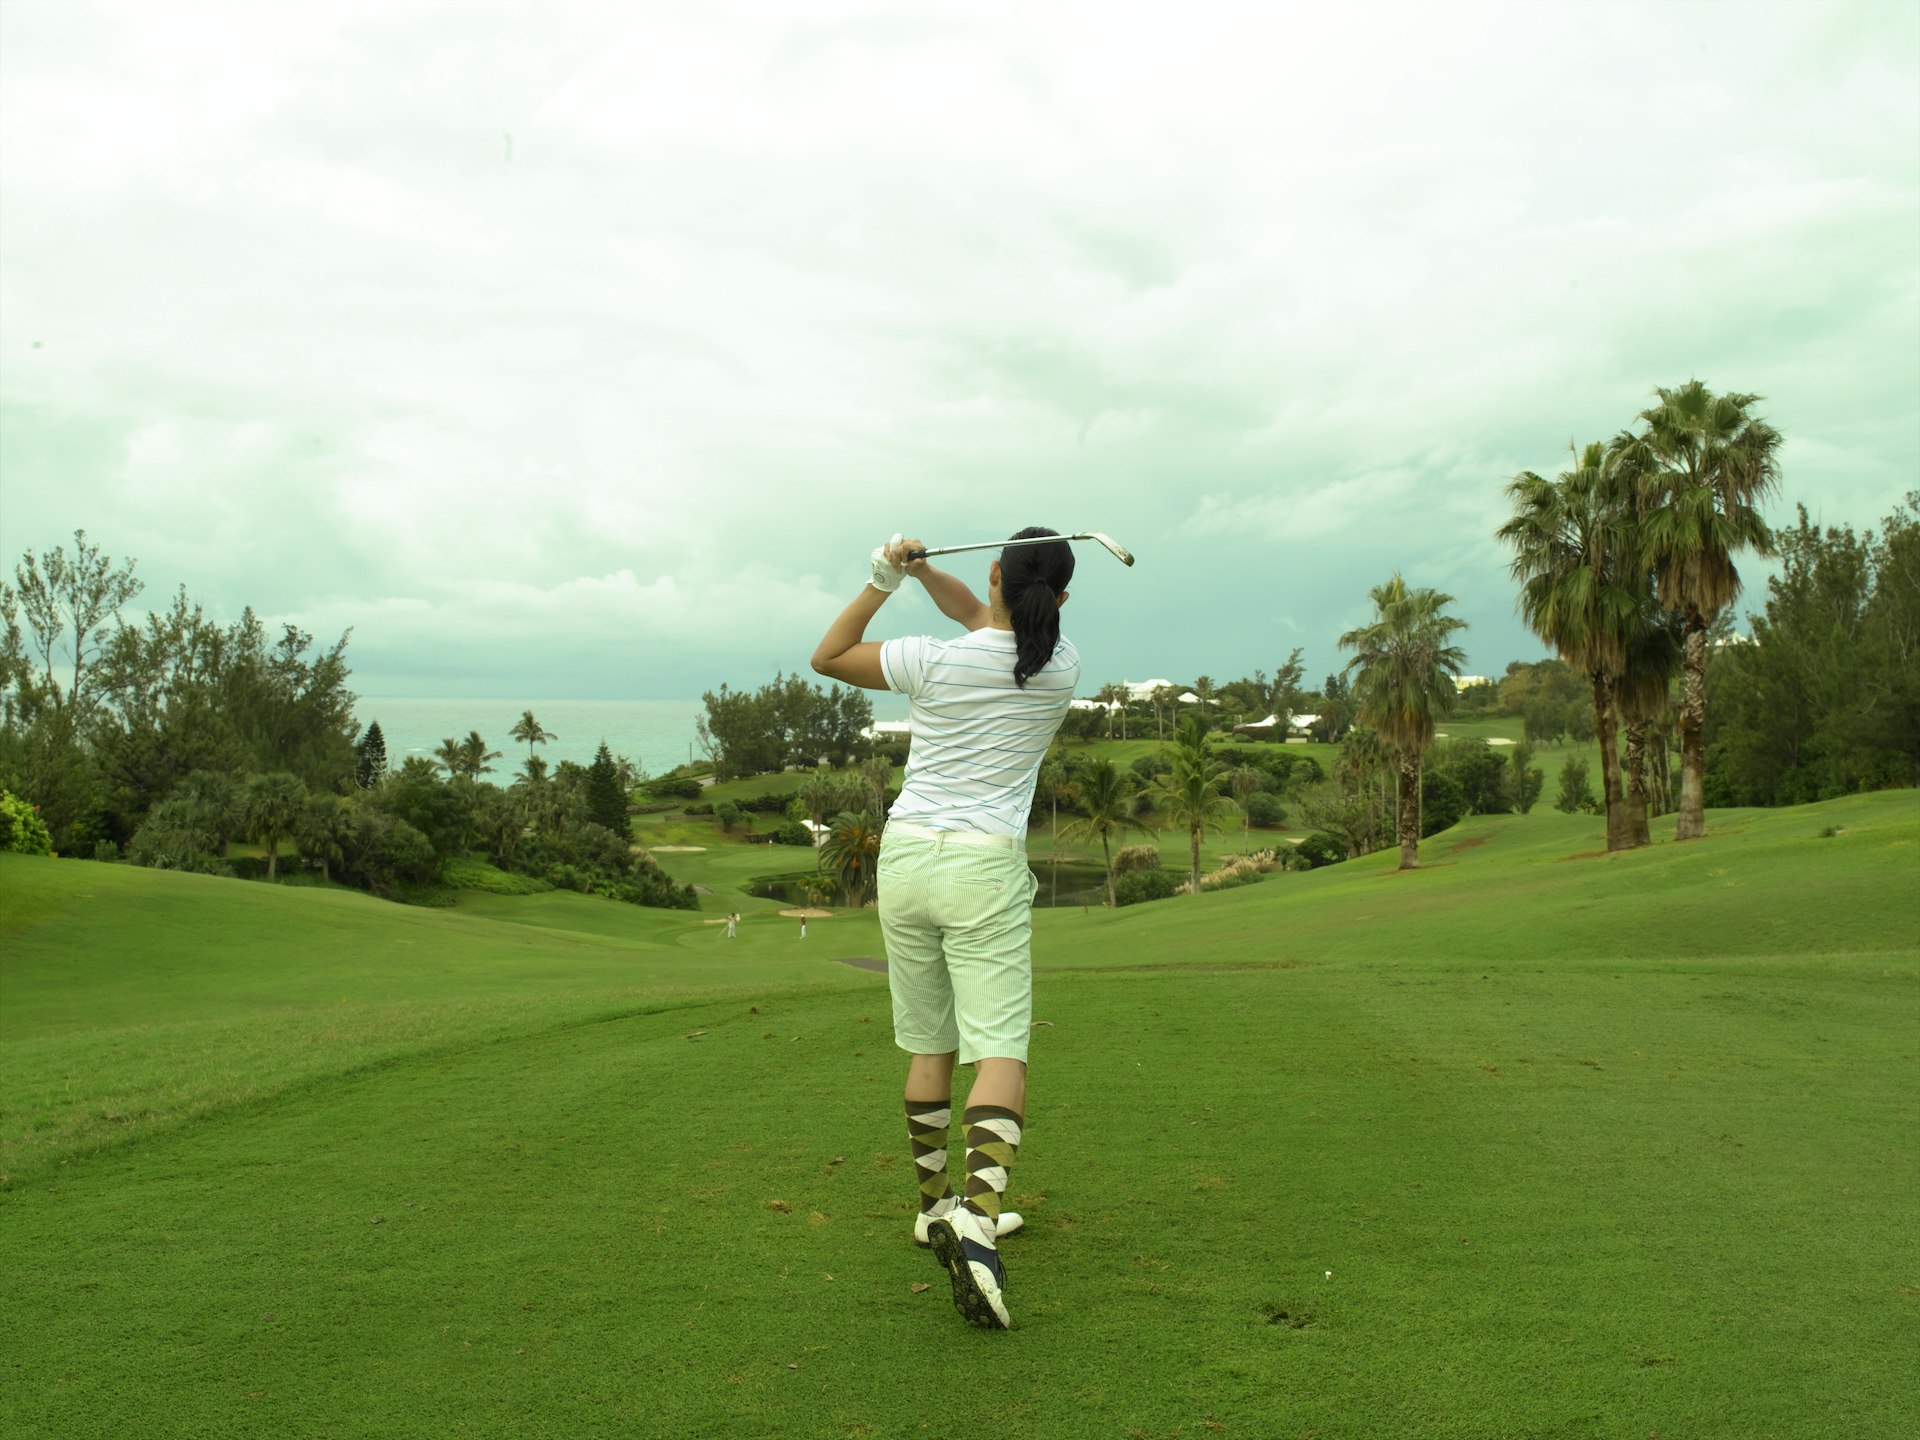 A woman takes a swing on a golf course in Bermuda. It's a cloudy day. 